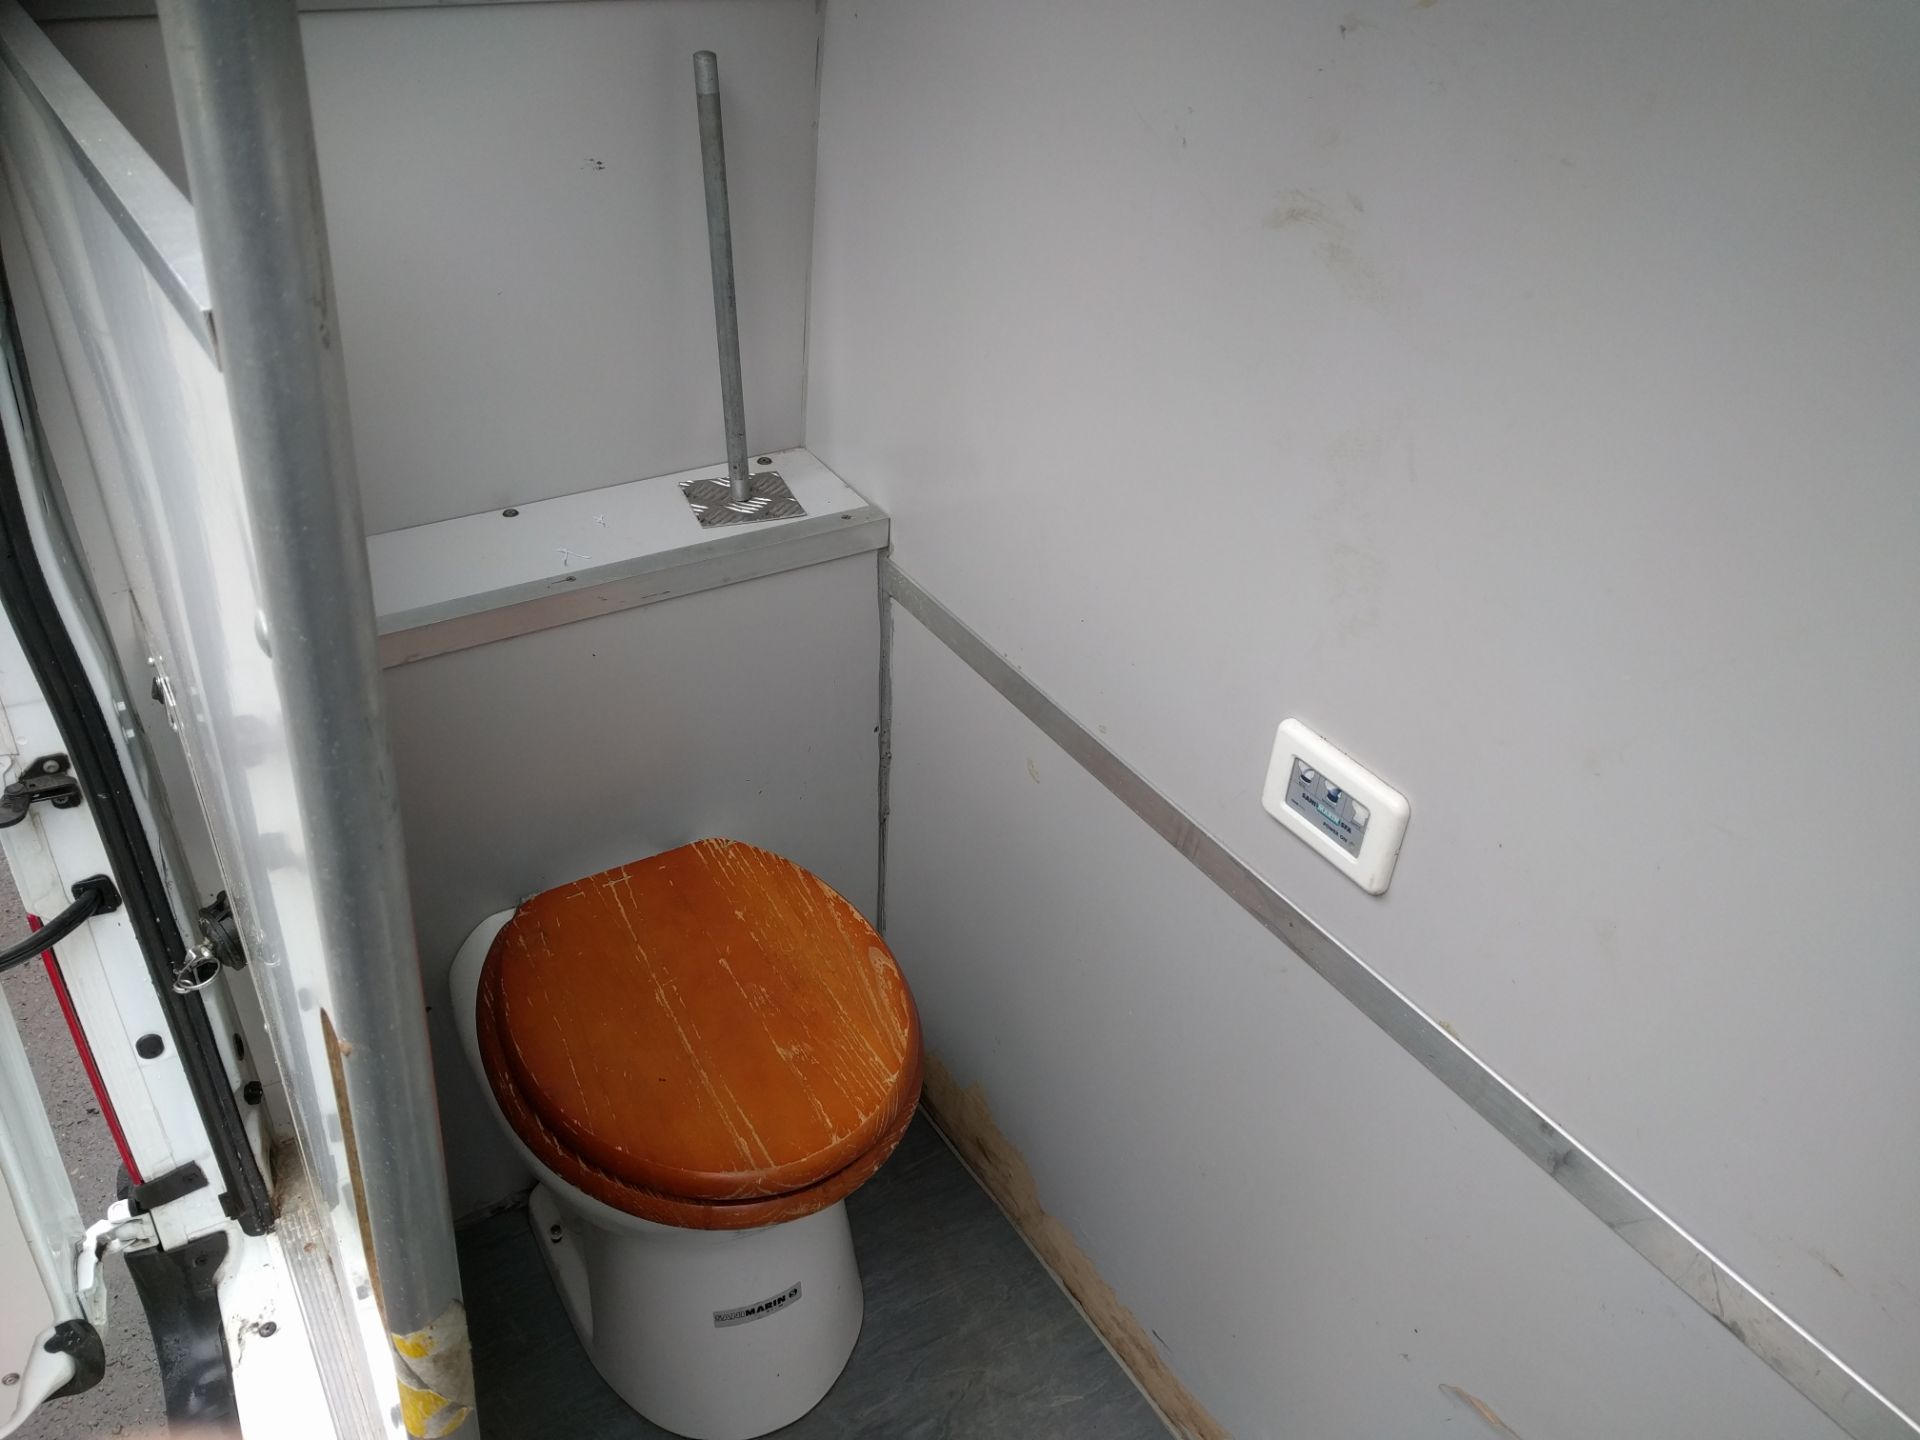 FORD TRANSIT 350 HIGH ROOF WELFARE UNIT - Image 12 of 15